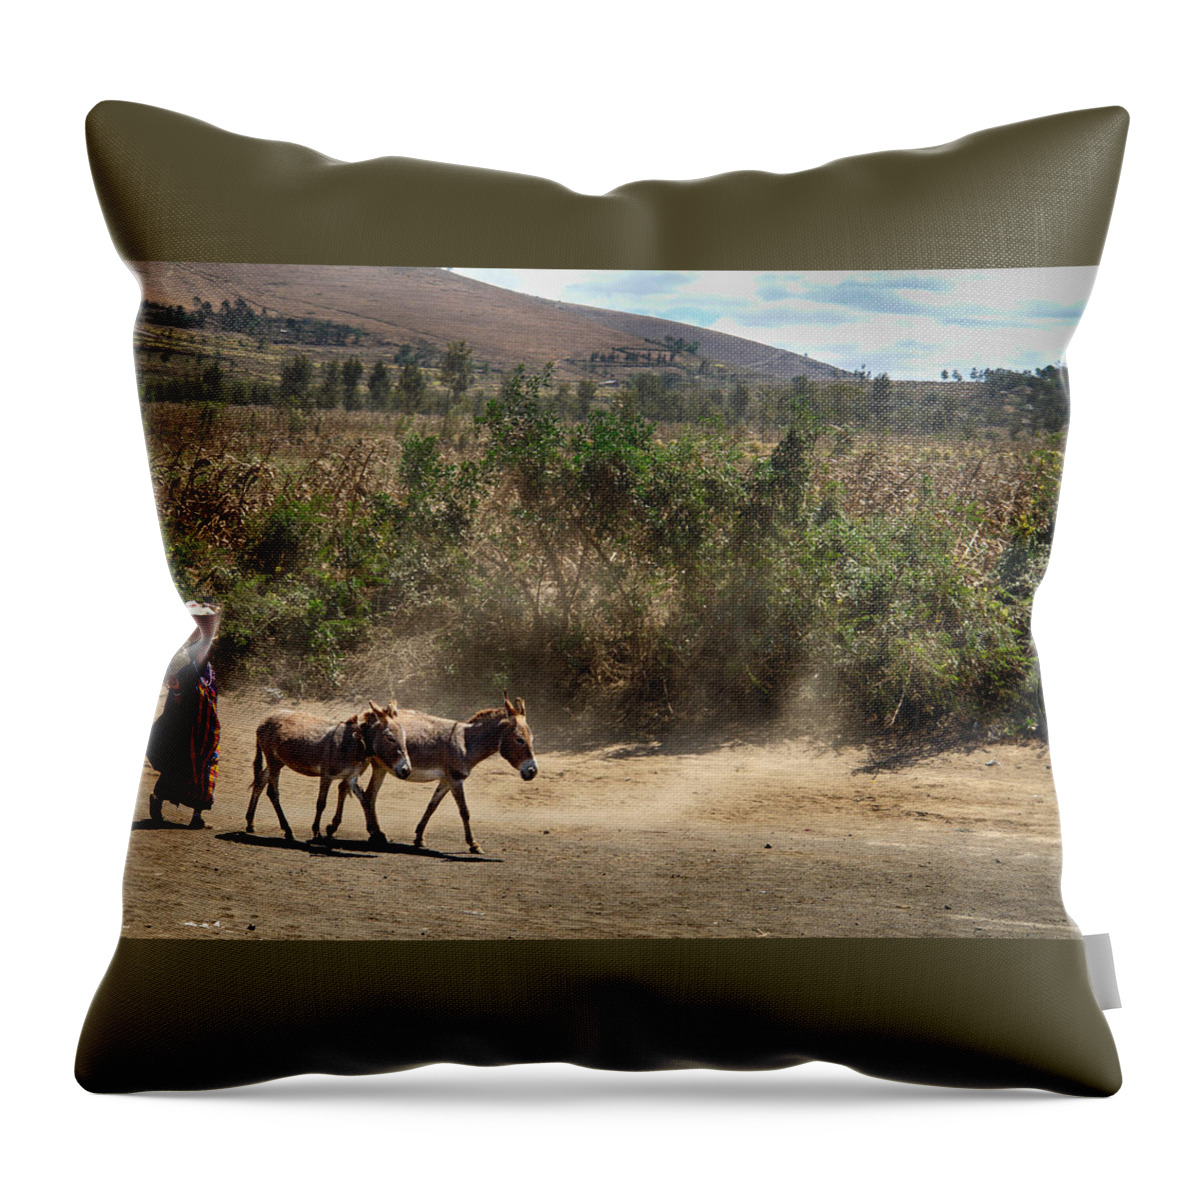 Africa Throw Pillow featuring the photograph Working Women by Kyla Goff